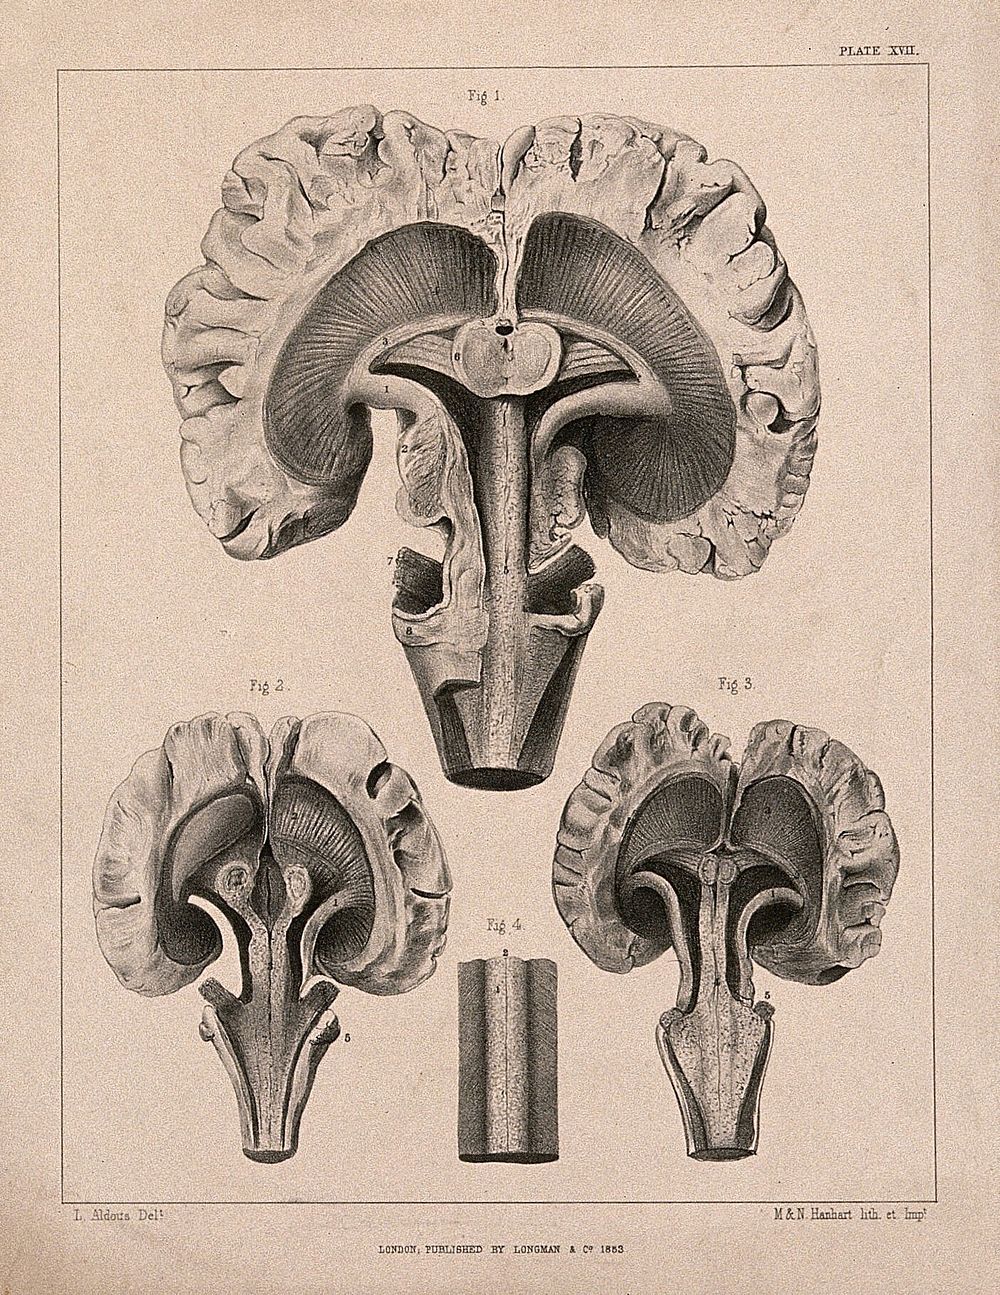 The brain of an animal: cross-section. Lithograph by L. Aldous, 1853.